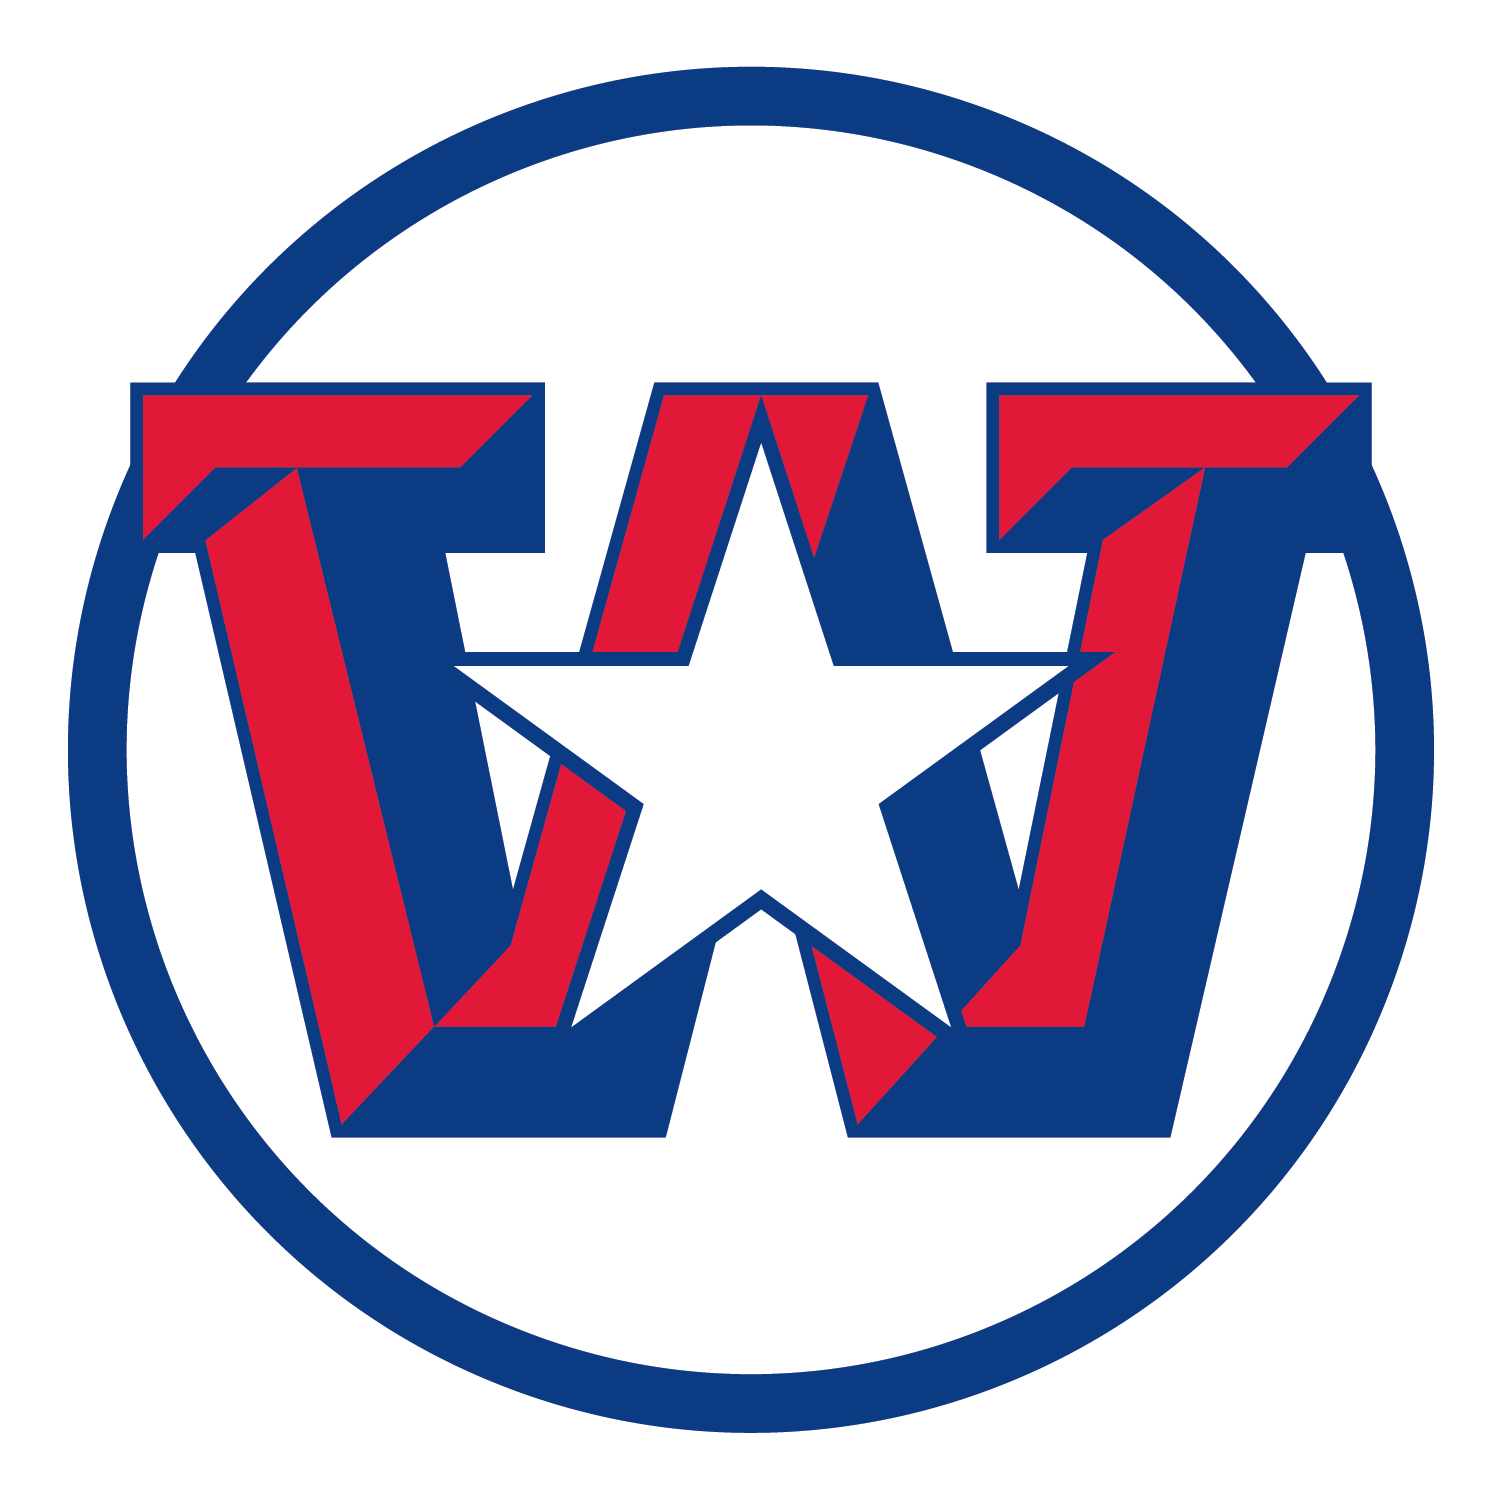 Waters logo with star in the middle